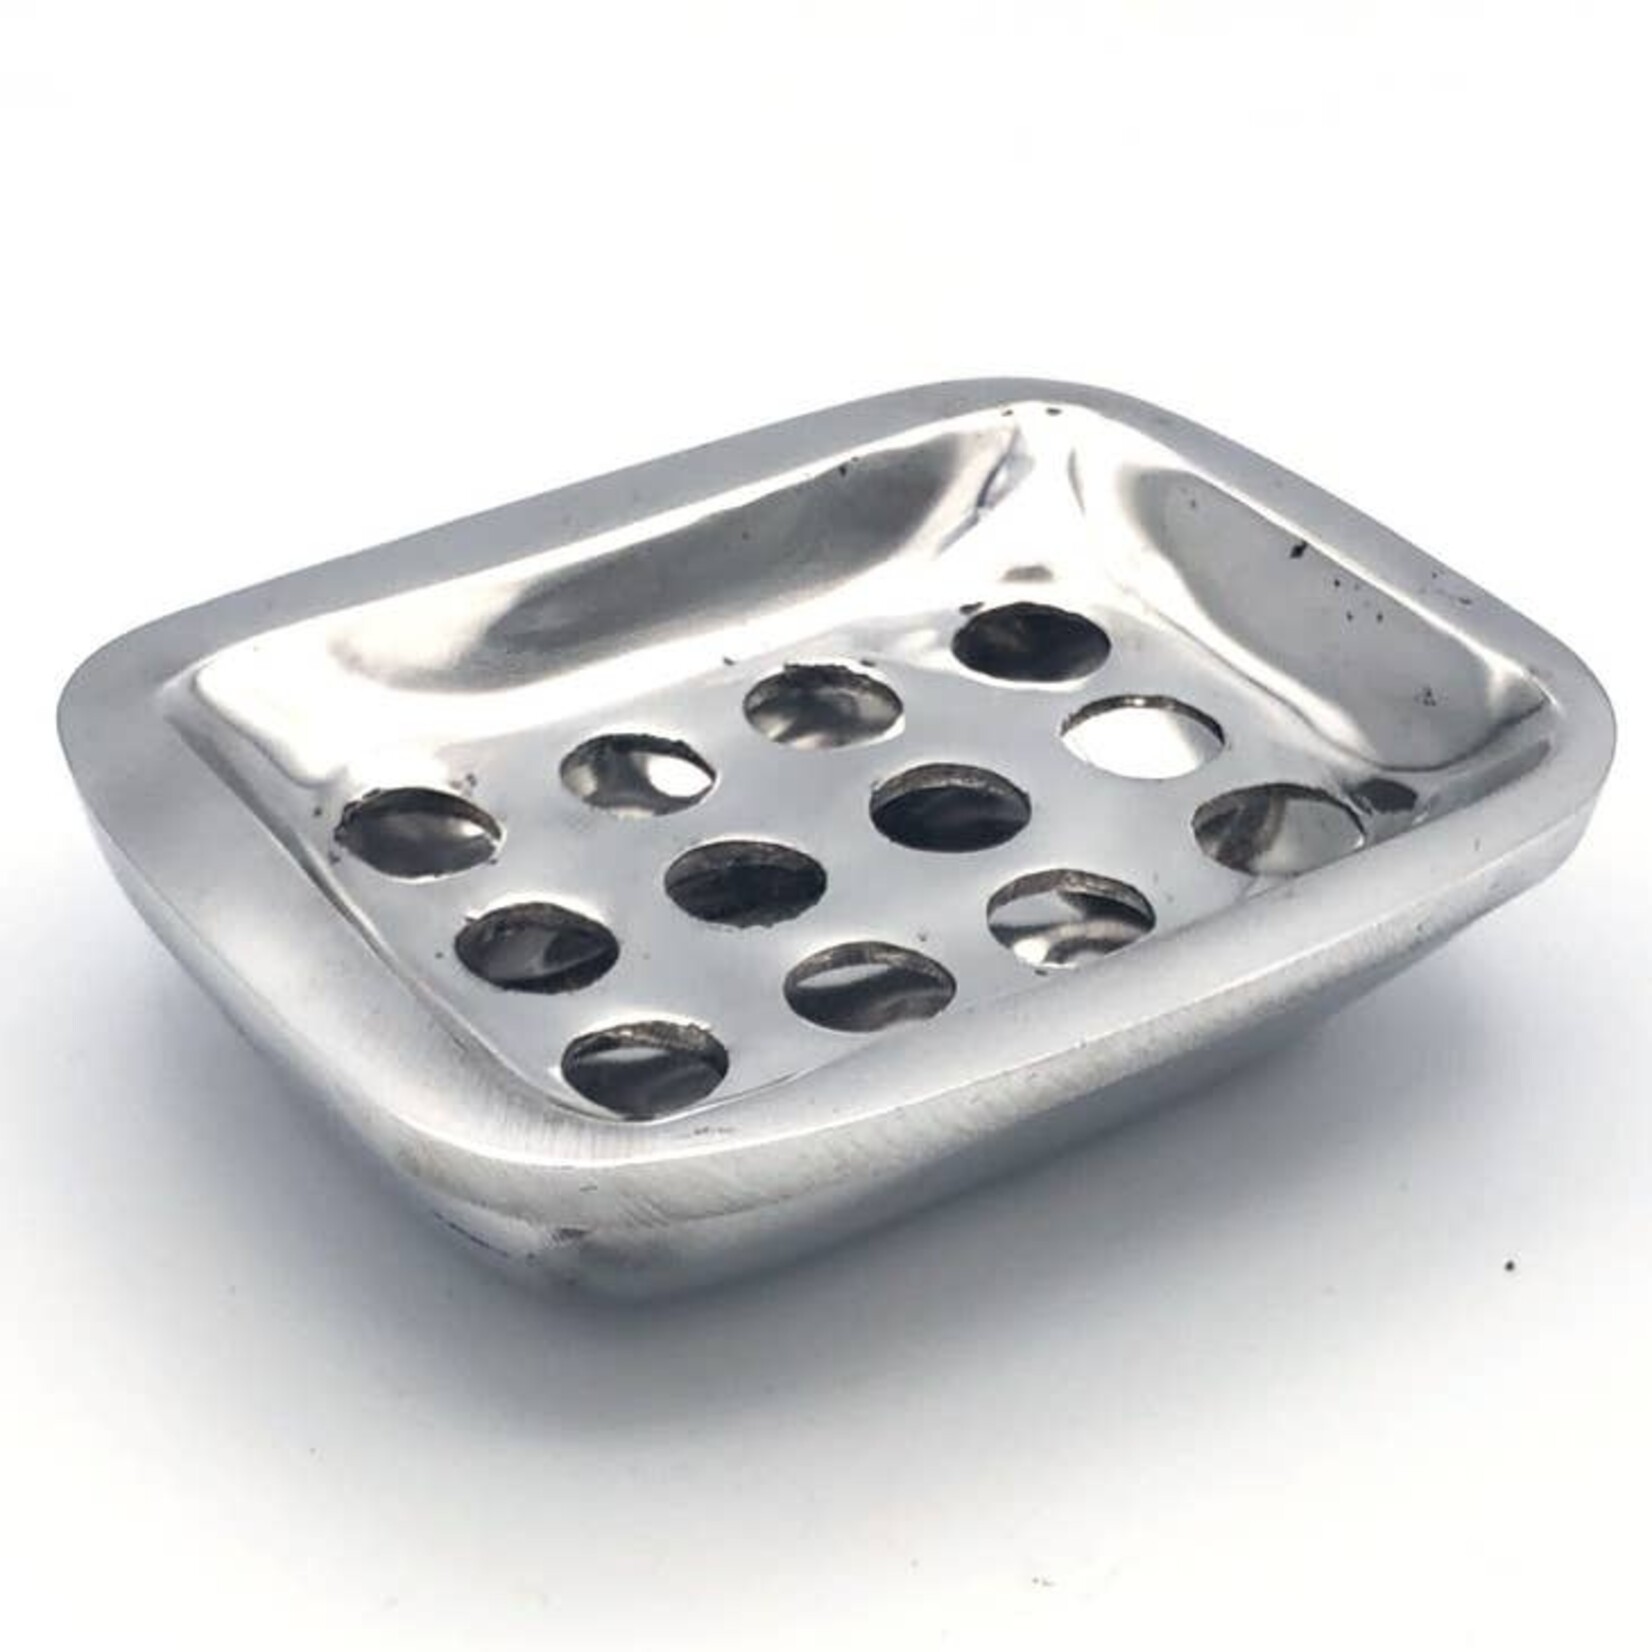 Women of the Cloud Forrest Recycled Aluminum Soap Dish, Nicaragua